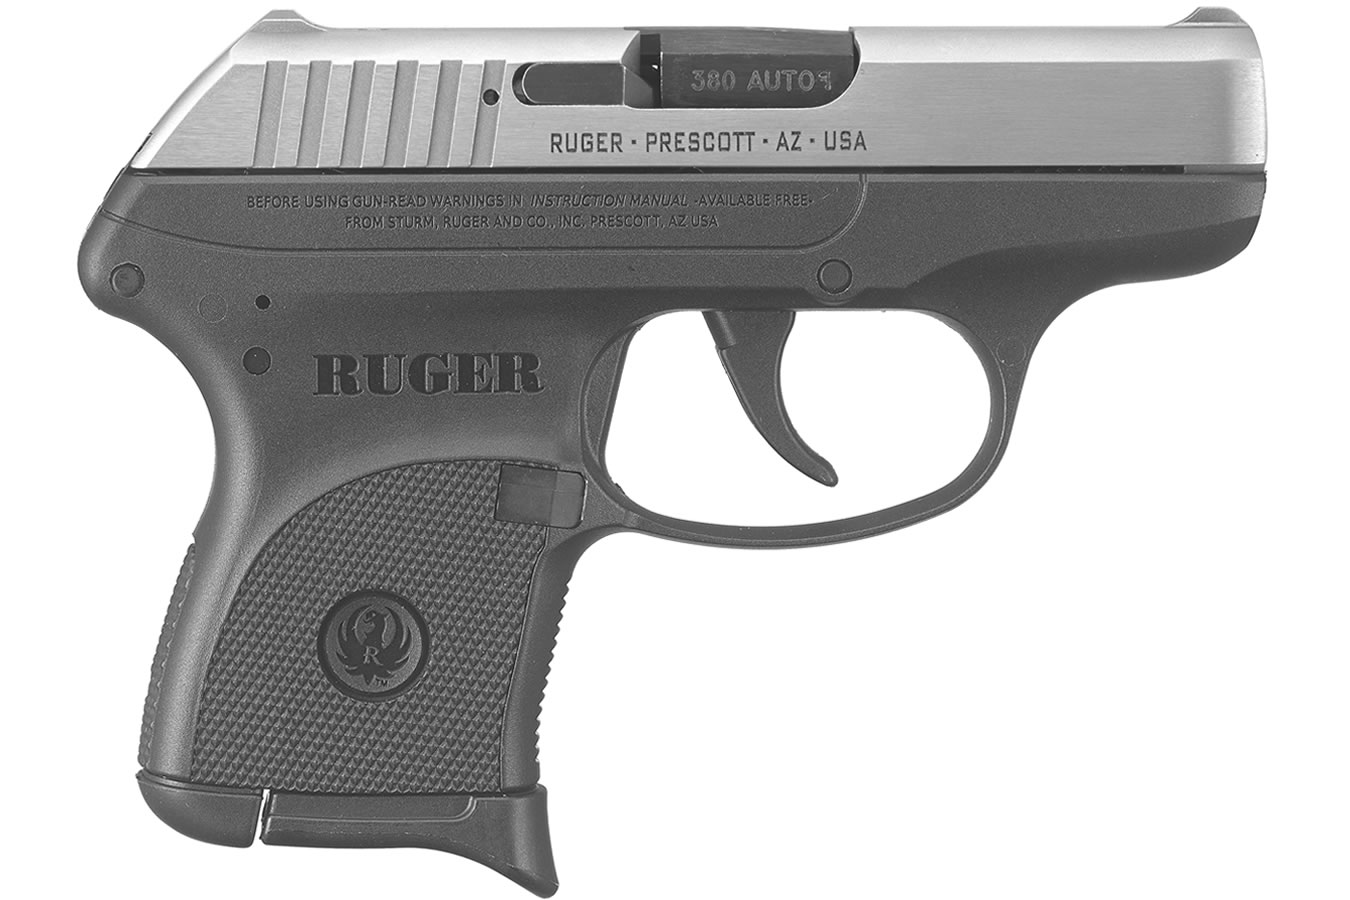 RUGER LCP 380 AUTO BRUSHED STAINLESS (LE)